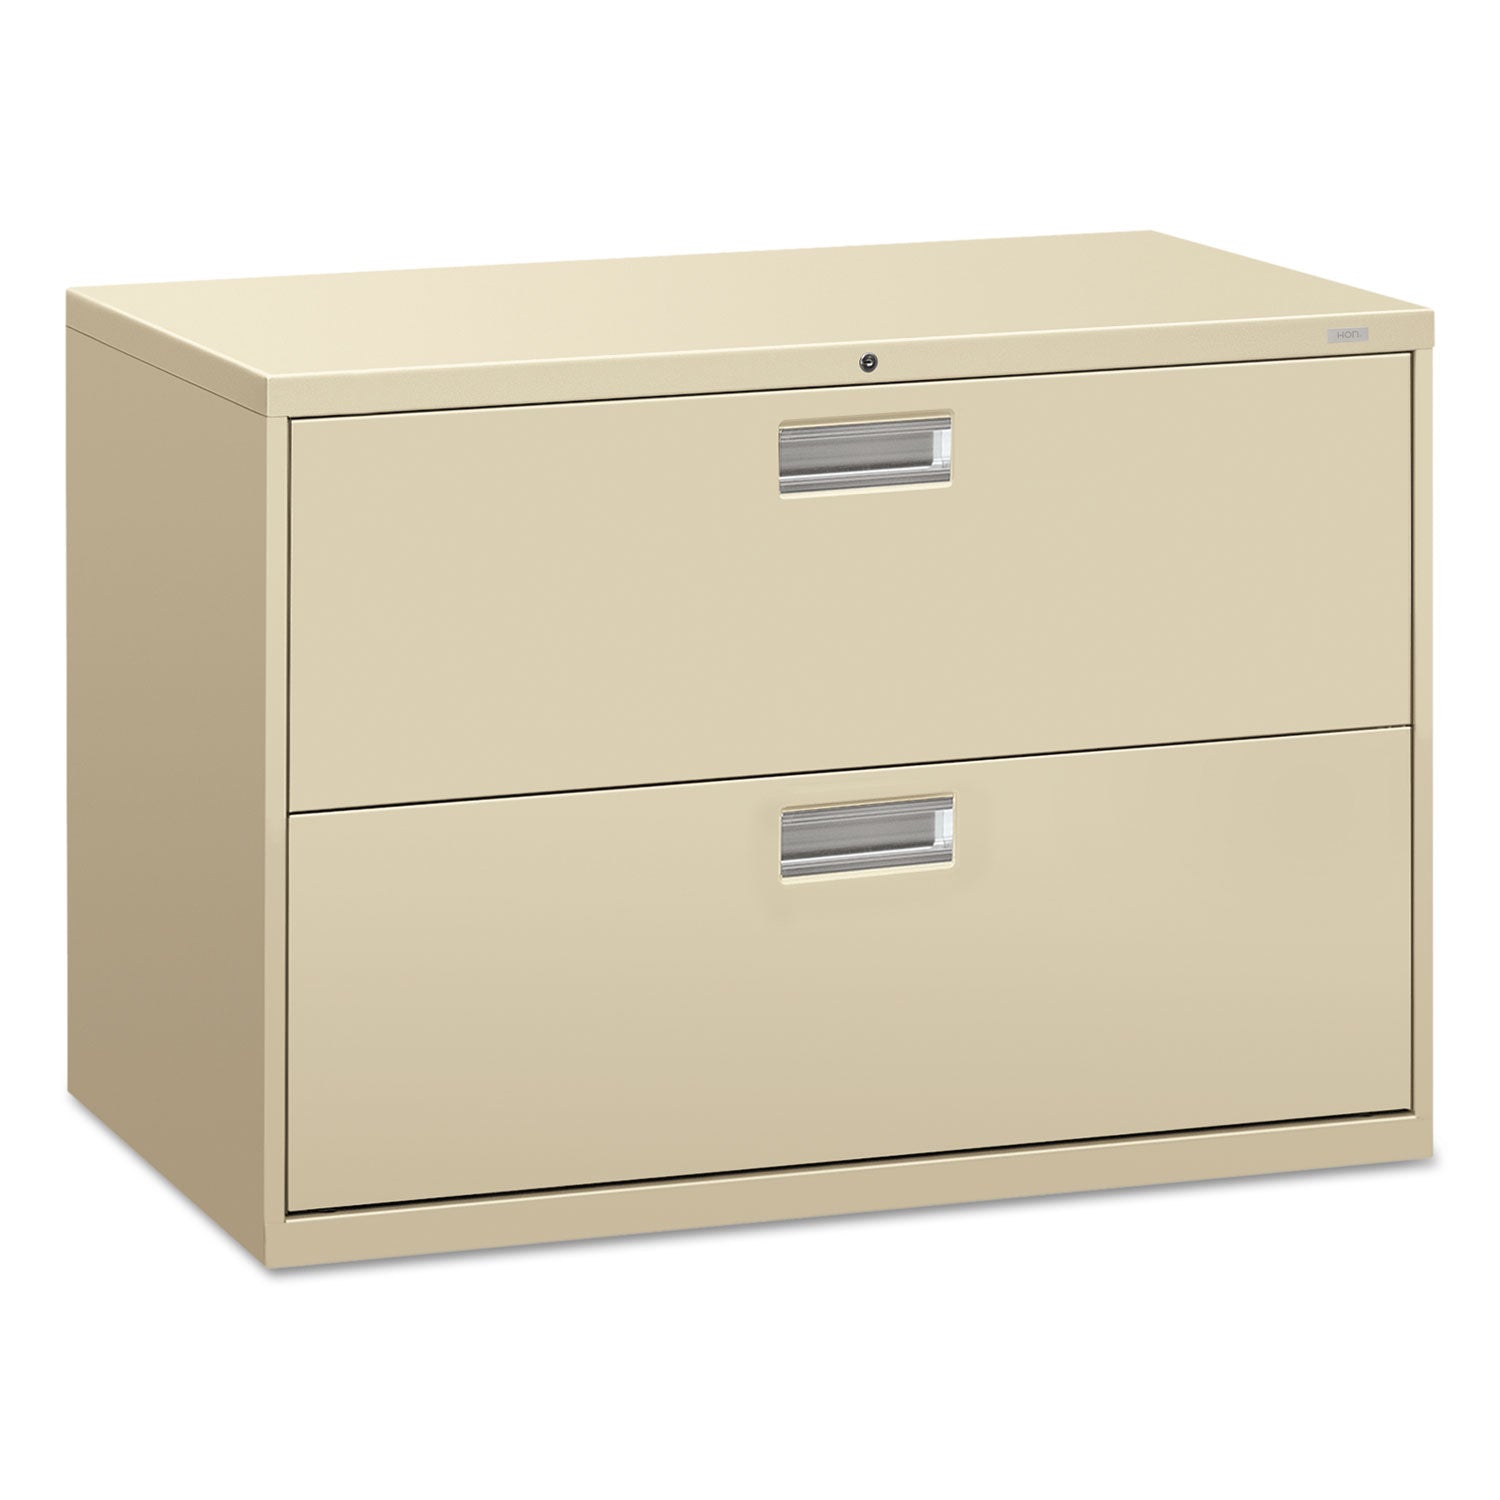 Brigade 600 Series Lateral File, 2 Legal/Letter-Size File Drawers, Putty, 42" x 18" x 28 - 